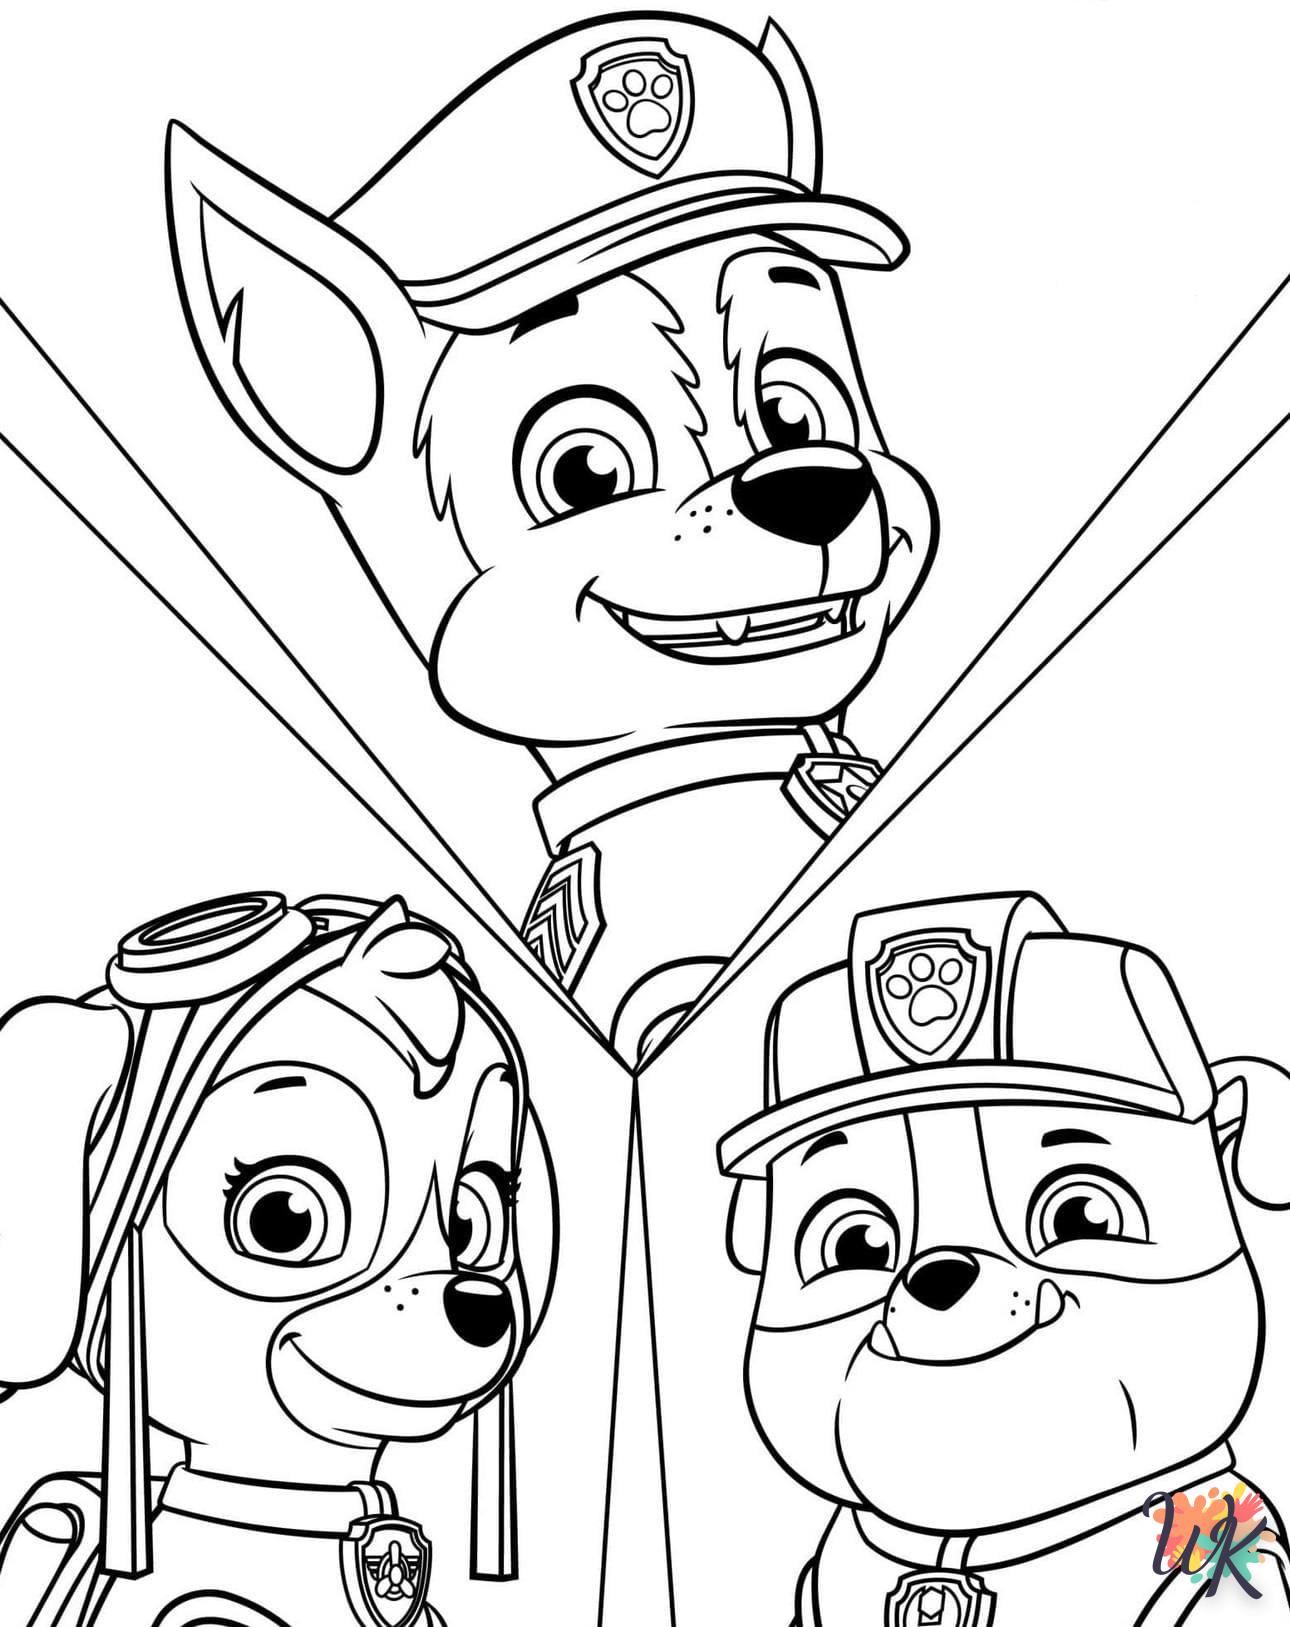 Paw Patrol coloring page to print for children aged 5